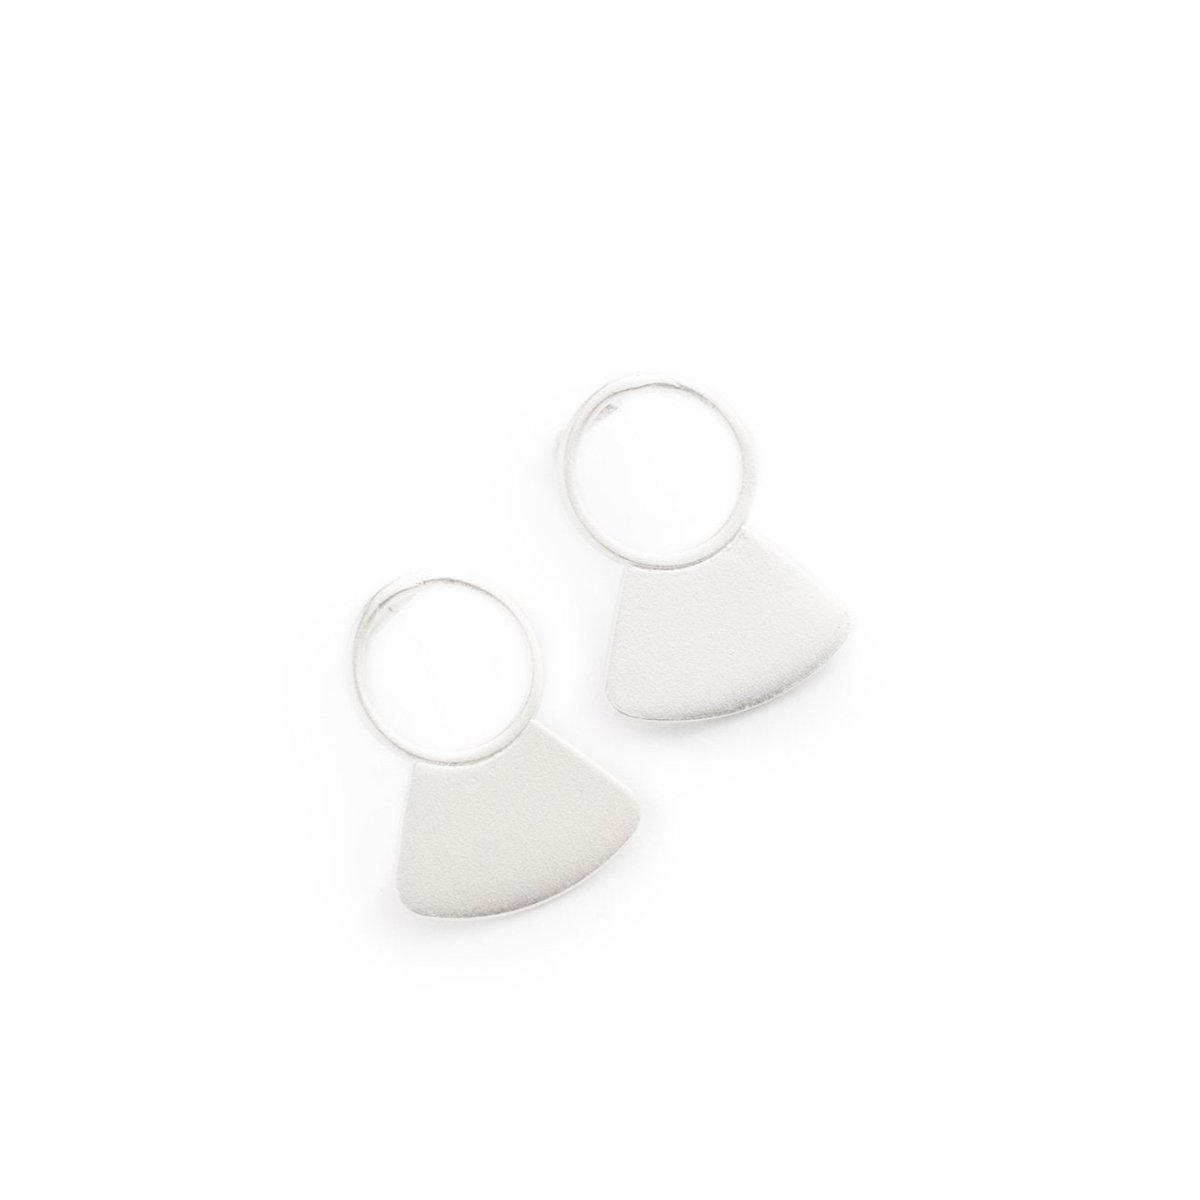 Small, silver-plated studs, featuring a delicate, open circle with a solid fan shape at the base, and sterling silver earring posts. Hand-crafted in Portland, Oregon.